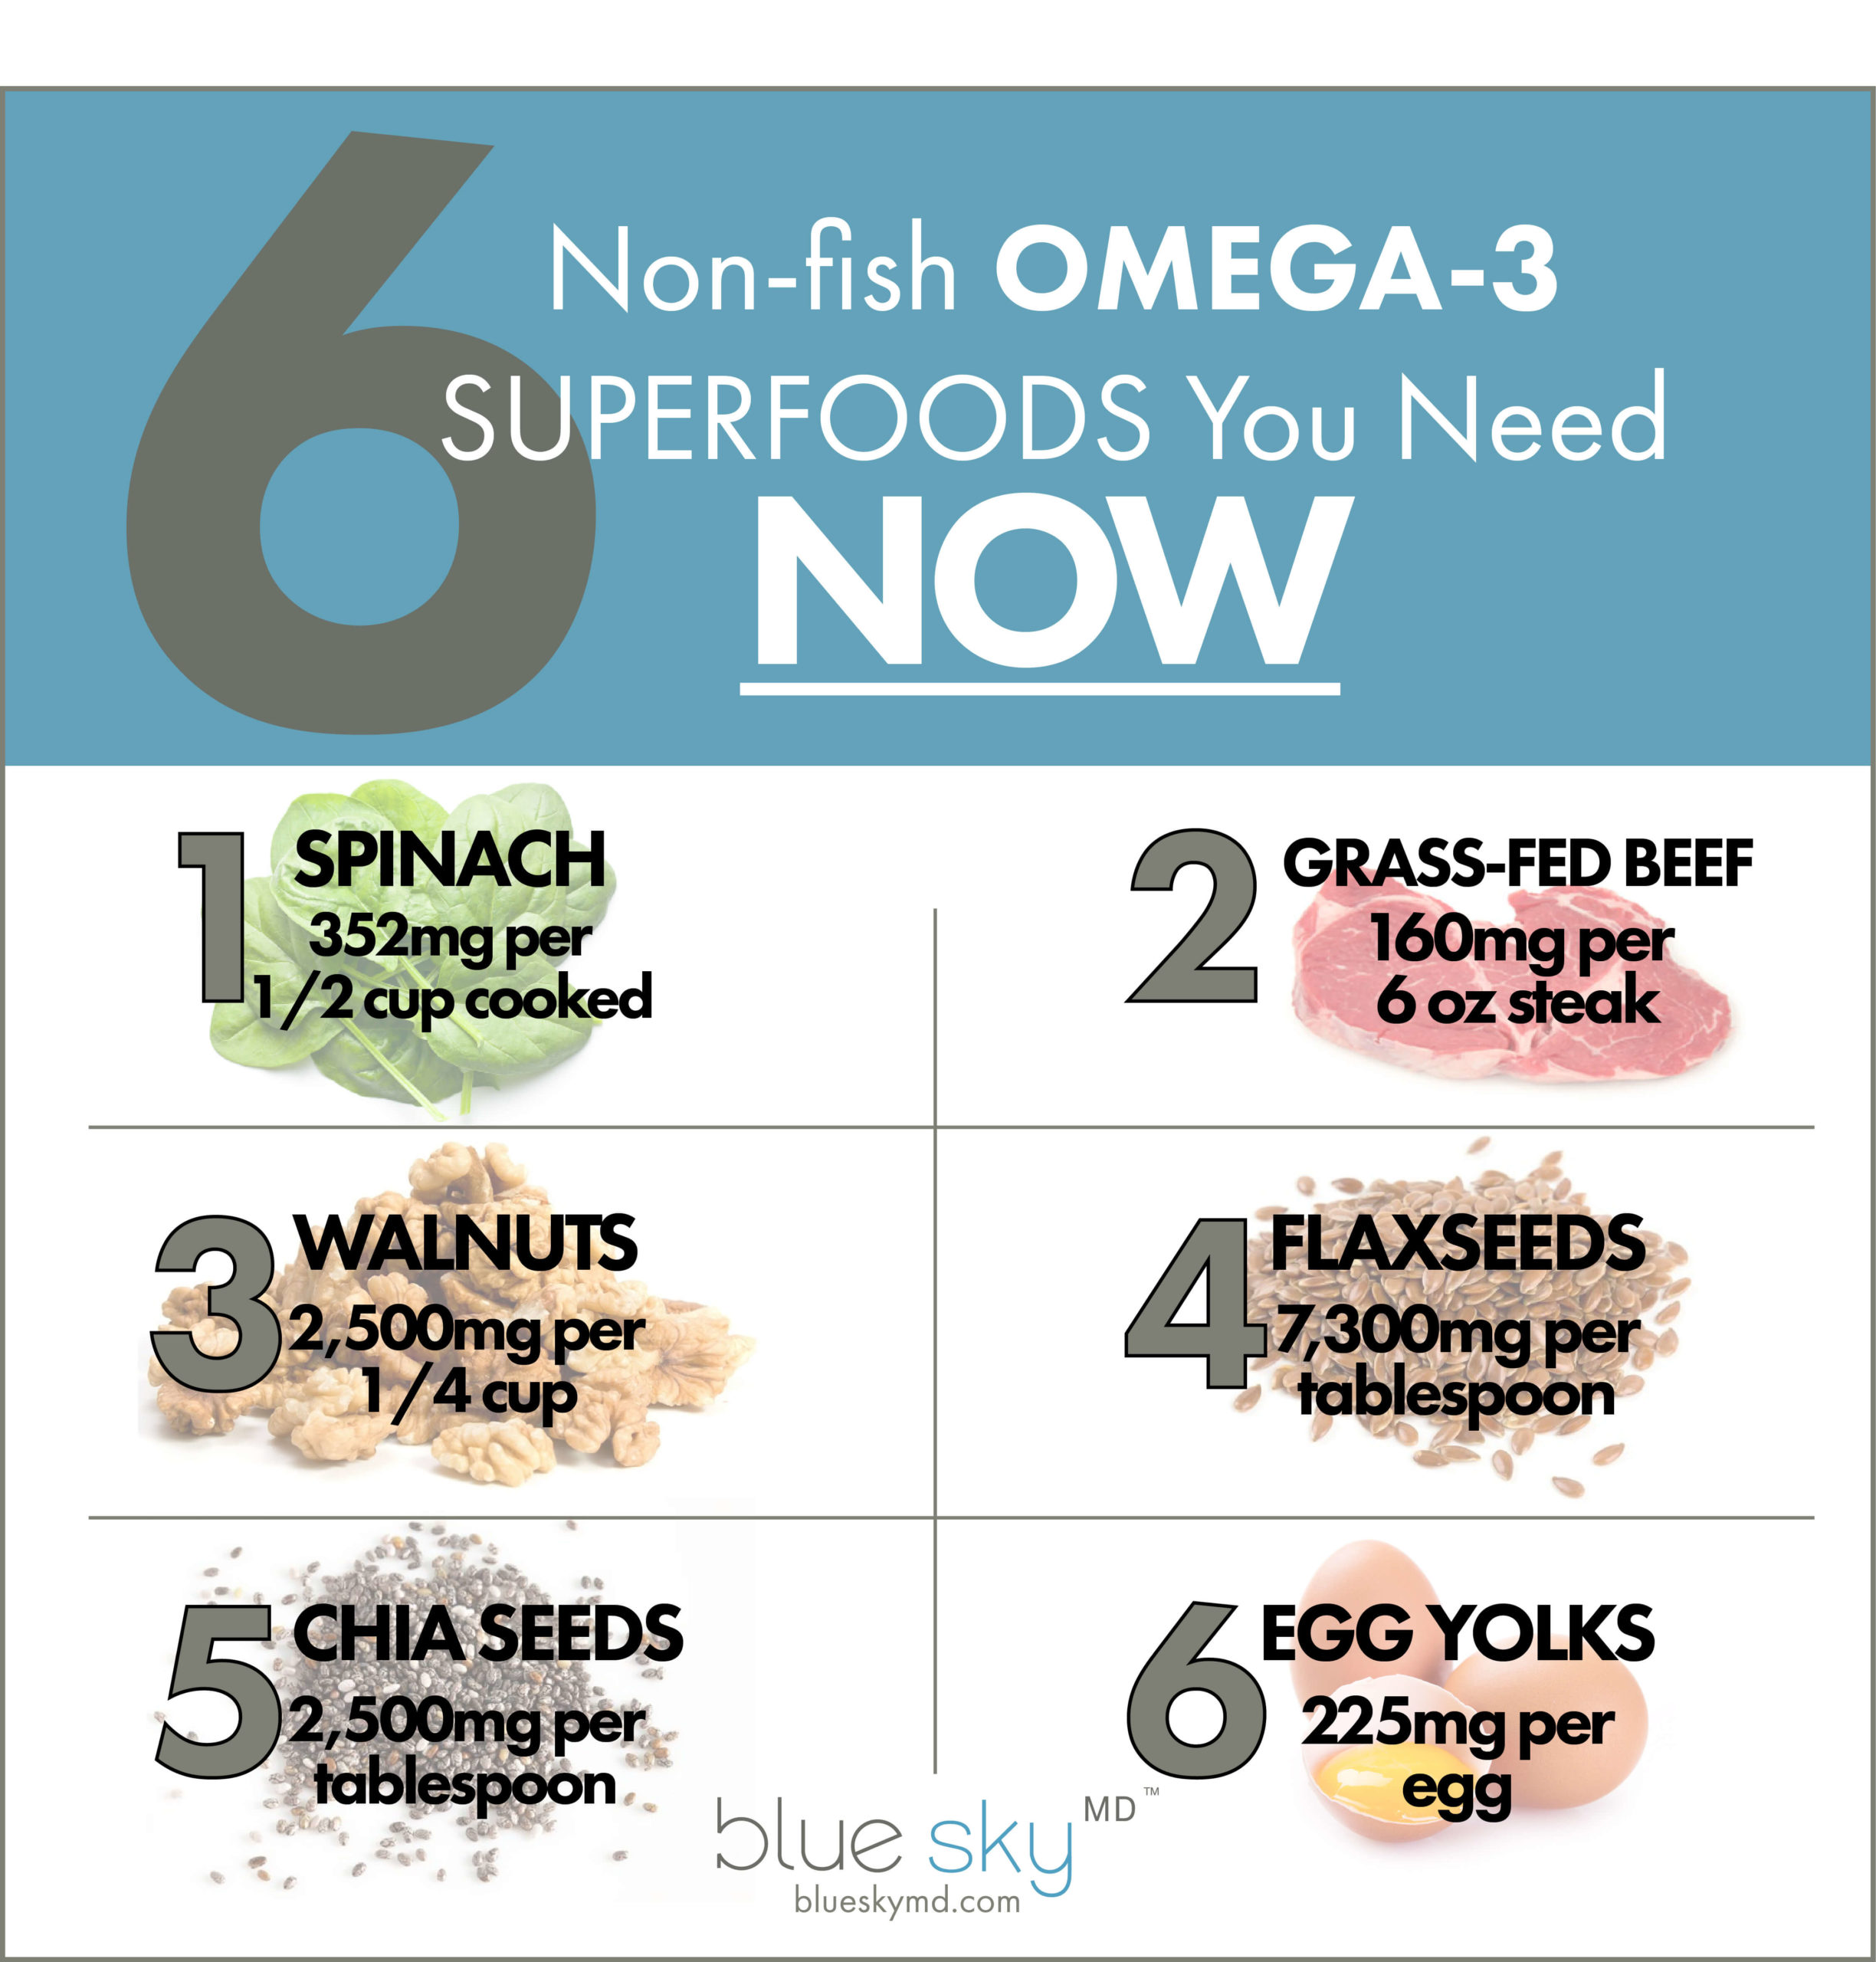 5 Non-fish Omega-3 Superfoods You Need NOW